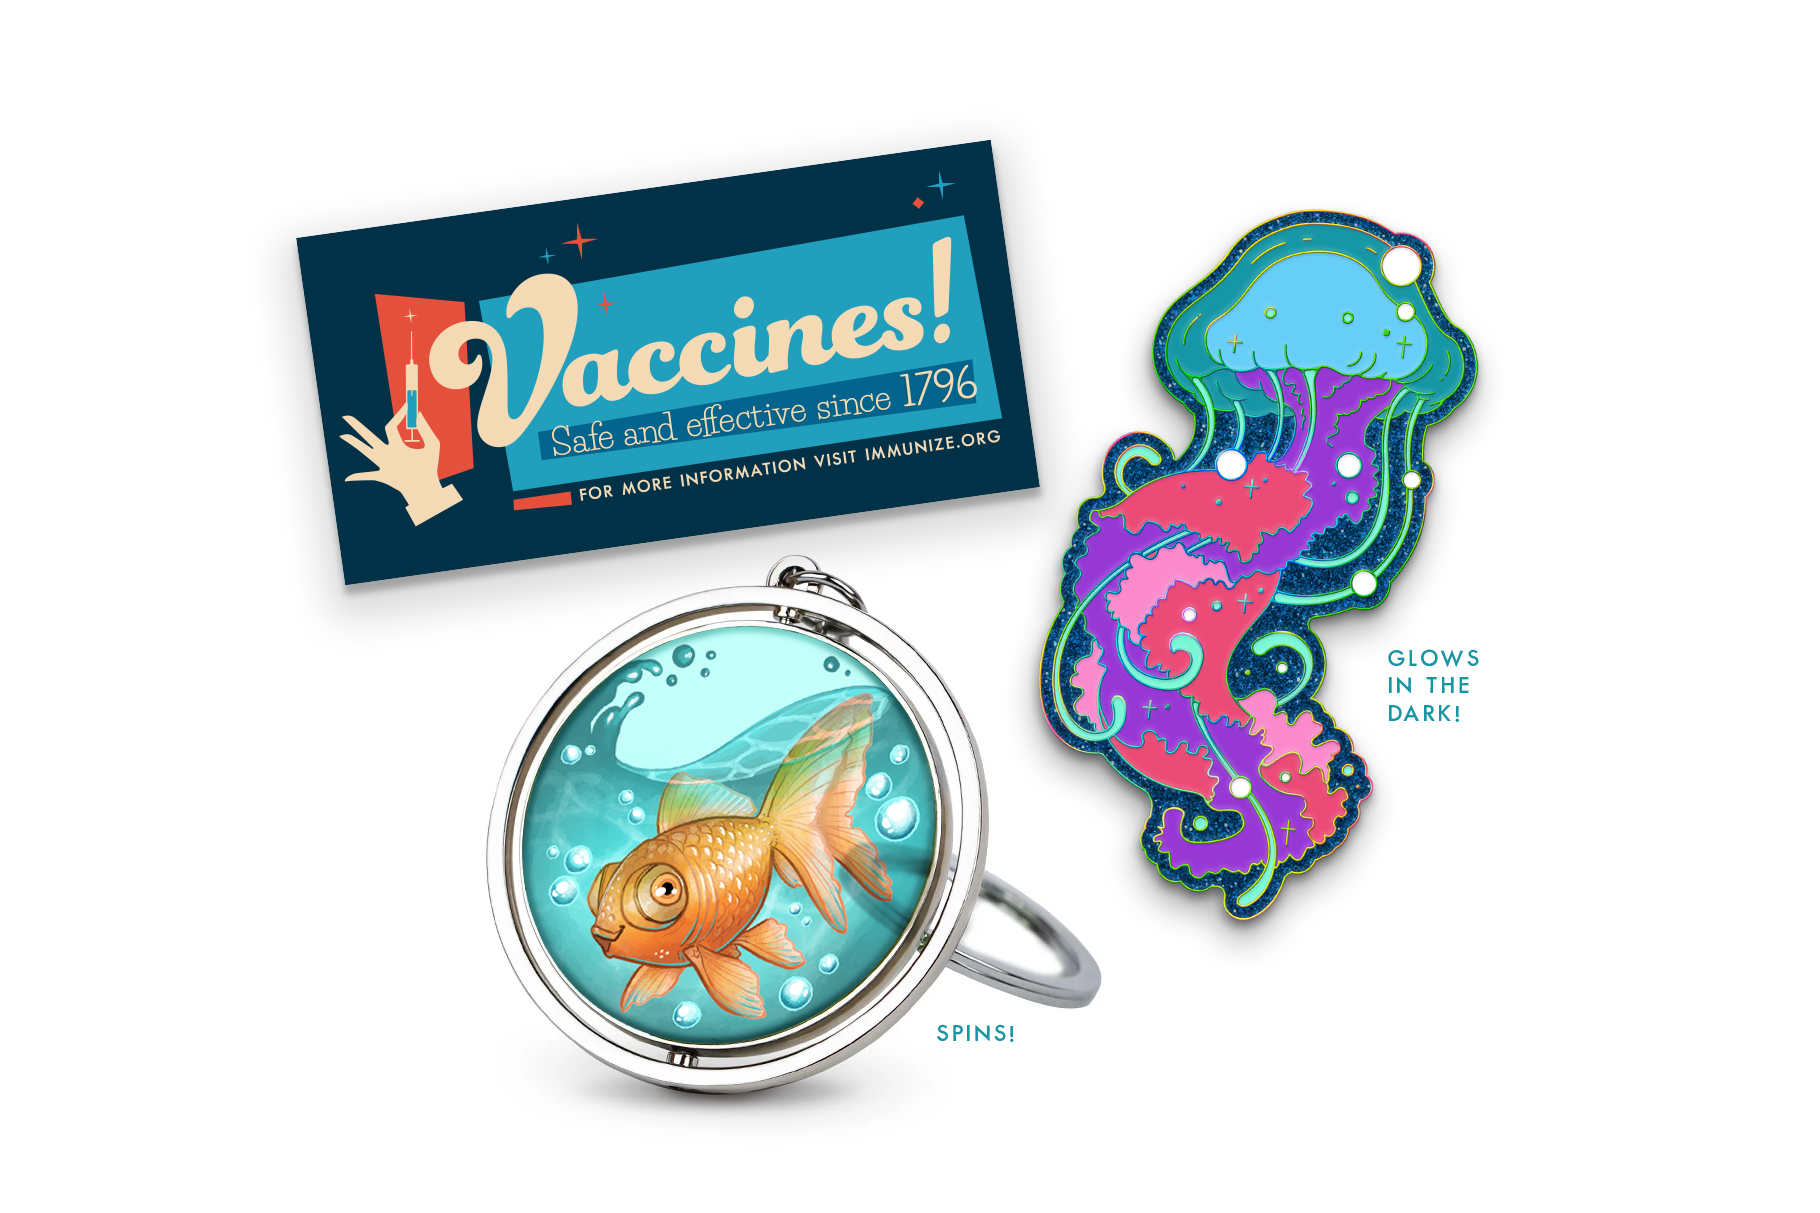 Image of the three November McElroy merch items: a blue bumper sticker that says “Vaccines! Safe and effective since 1796”, a spinning translucent acrylic keychain with an illustration of Stephen the Fish, and an enamel voidfish pin that glows in the dark.